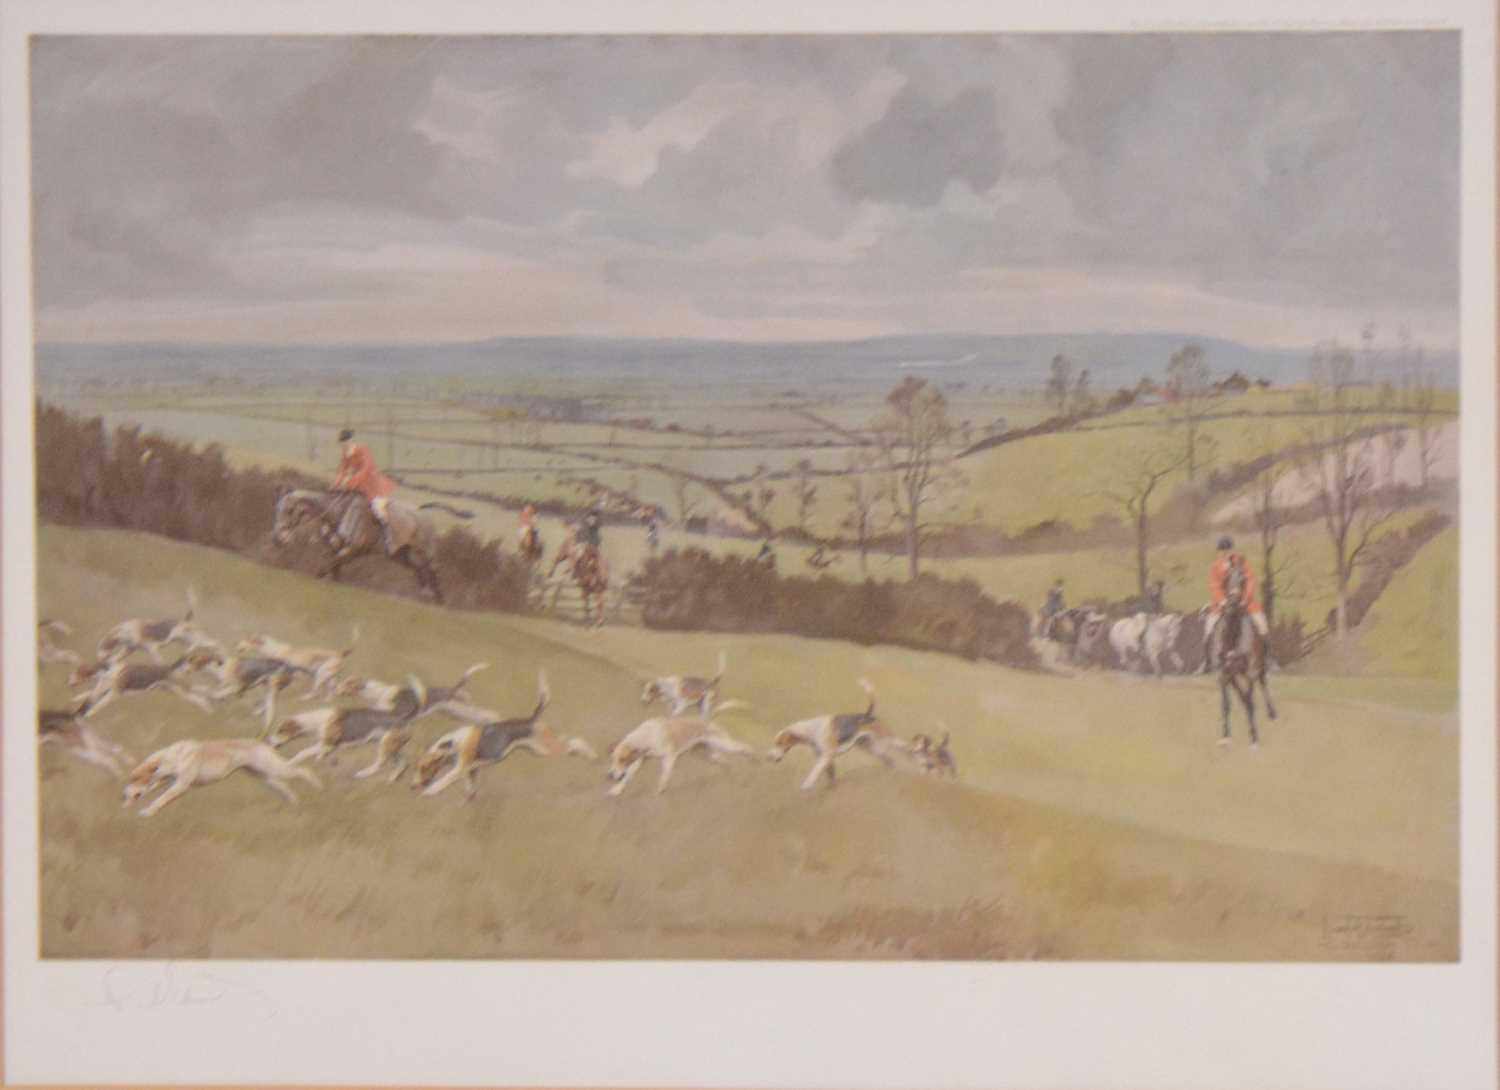 After Lionel Edwards, Hunting Countries - The Cotswold and The Waddon Chase, and other prints. - Image 5 of 14